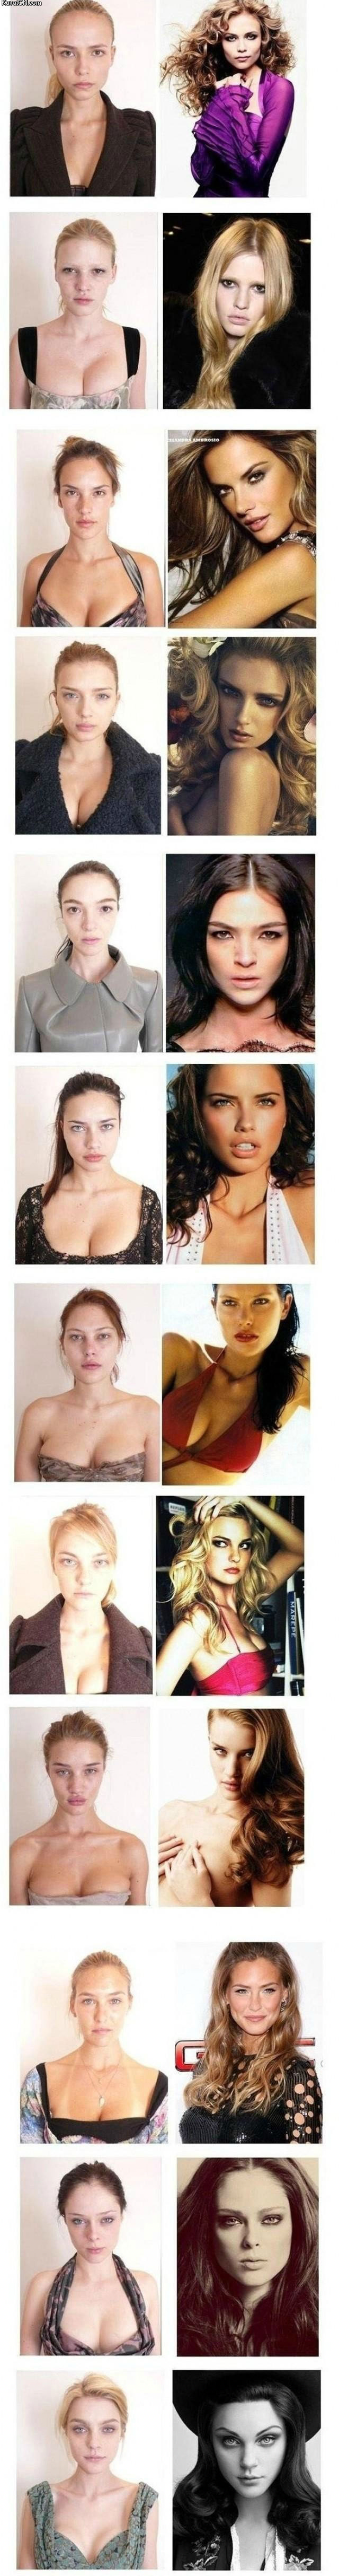 supermodels_with_and_without_makeup.jpg